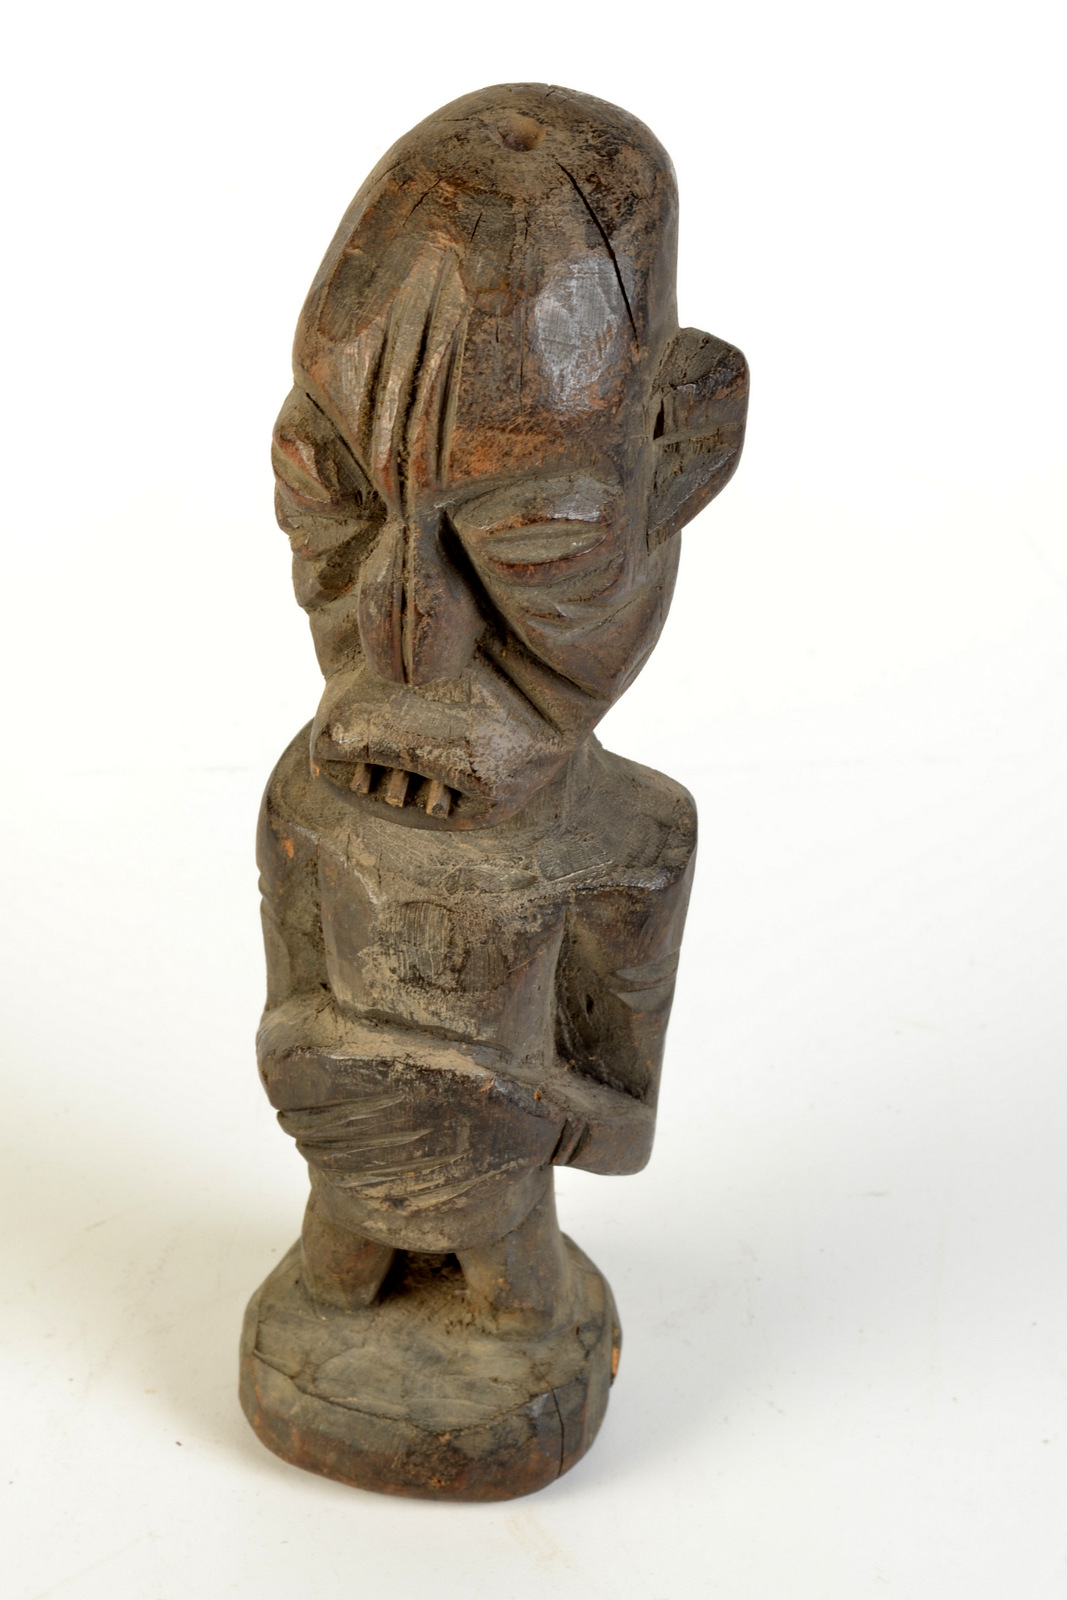 THE SHEILA ROSENBERG COLLECTION

A Yoruba carved wood figure, height 29cm.